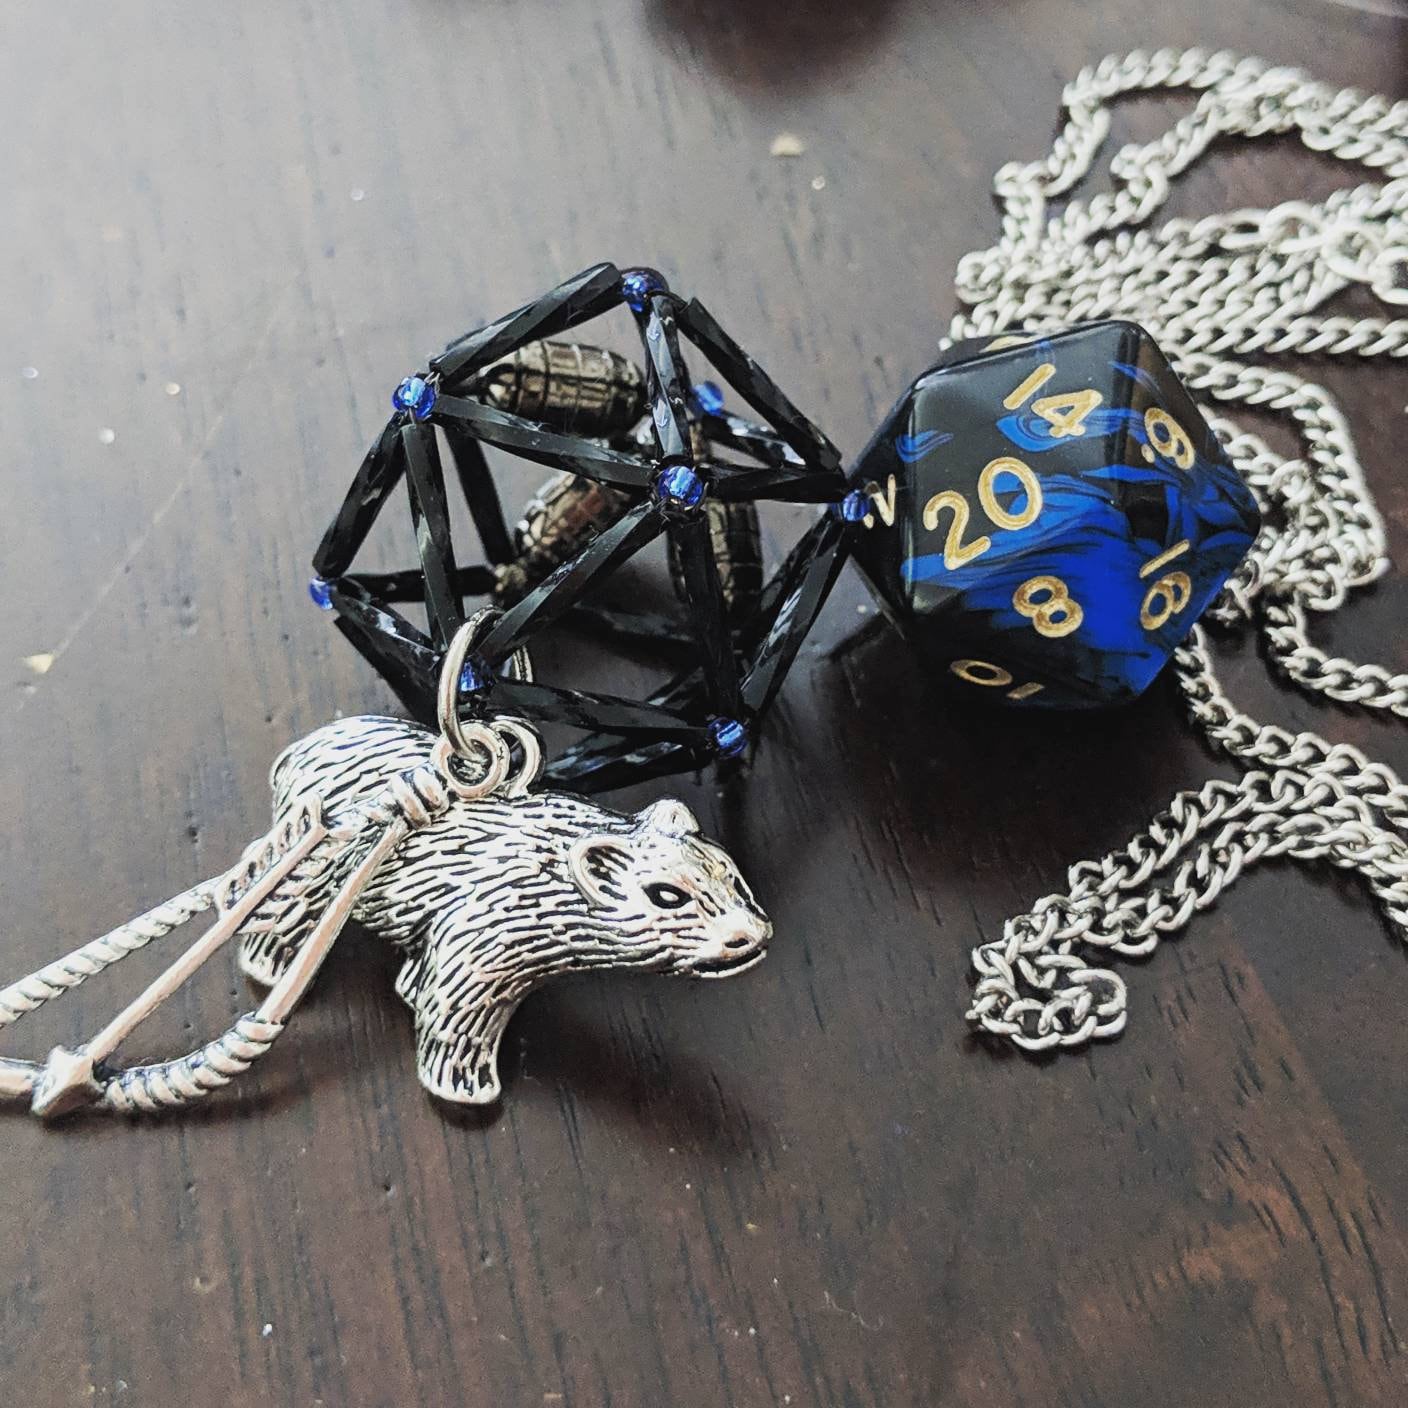 Vex Necklace: Black necklace cage with blue accent beads. Two charms: bow and arrow and bear charm.